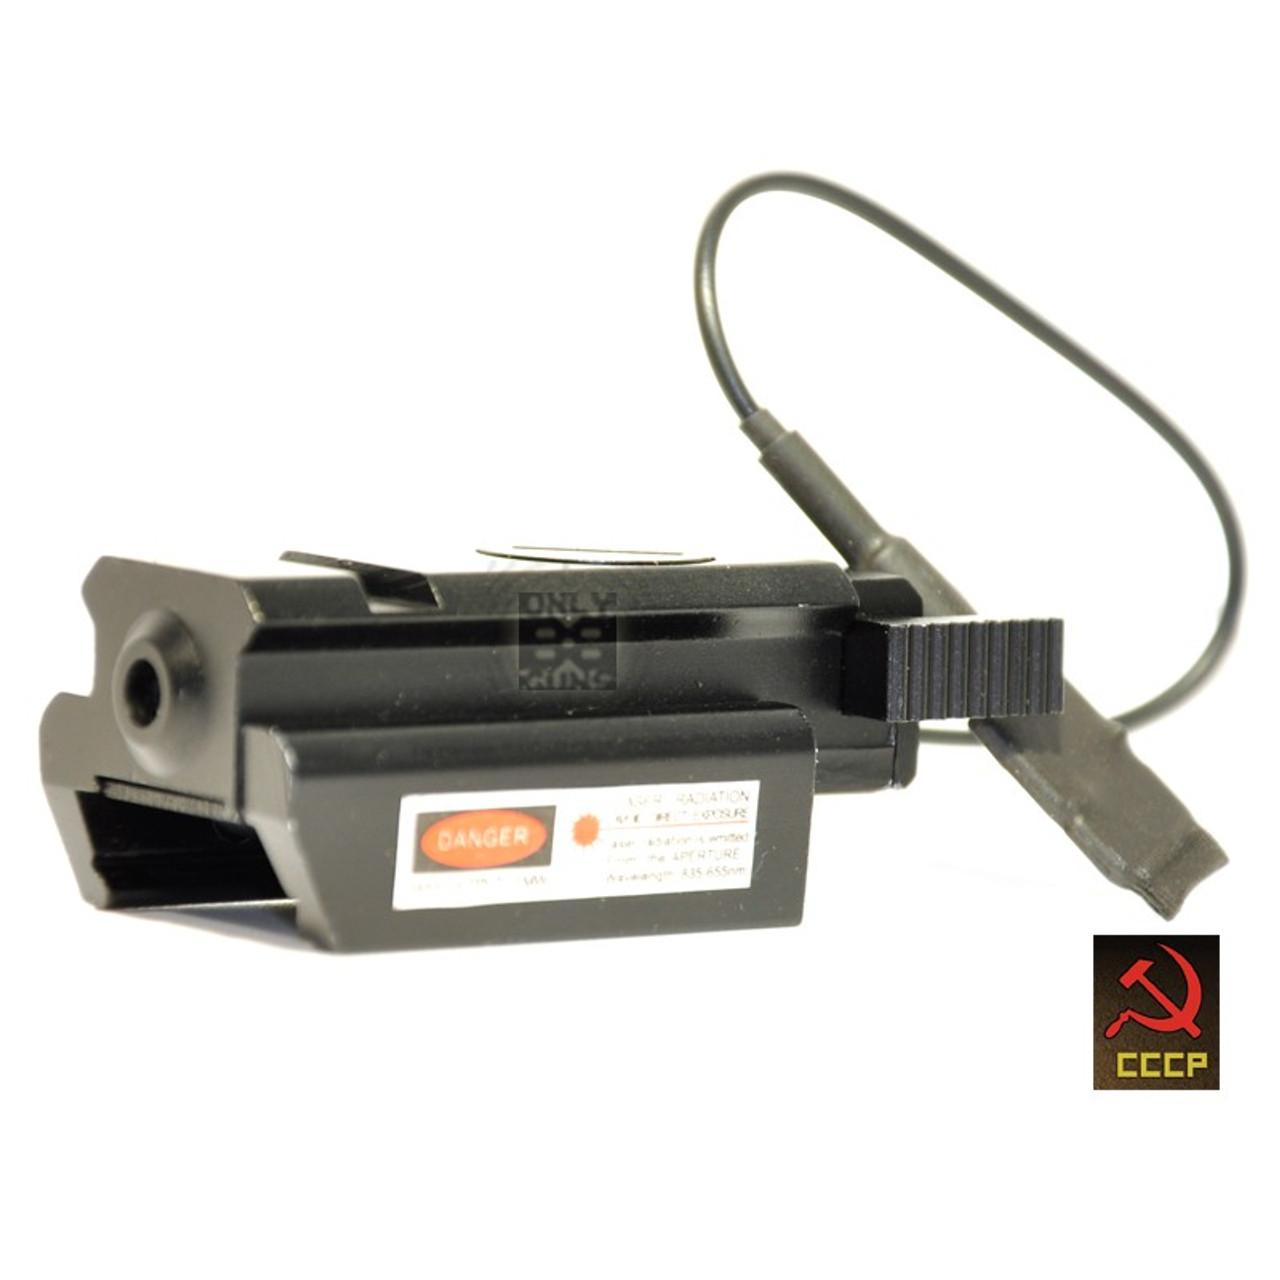 CCCP Pistol Laser (20mm RIS Rail) with Pressure Pad - AGL Airsoft